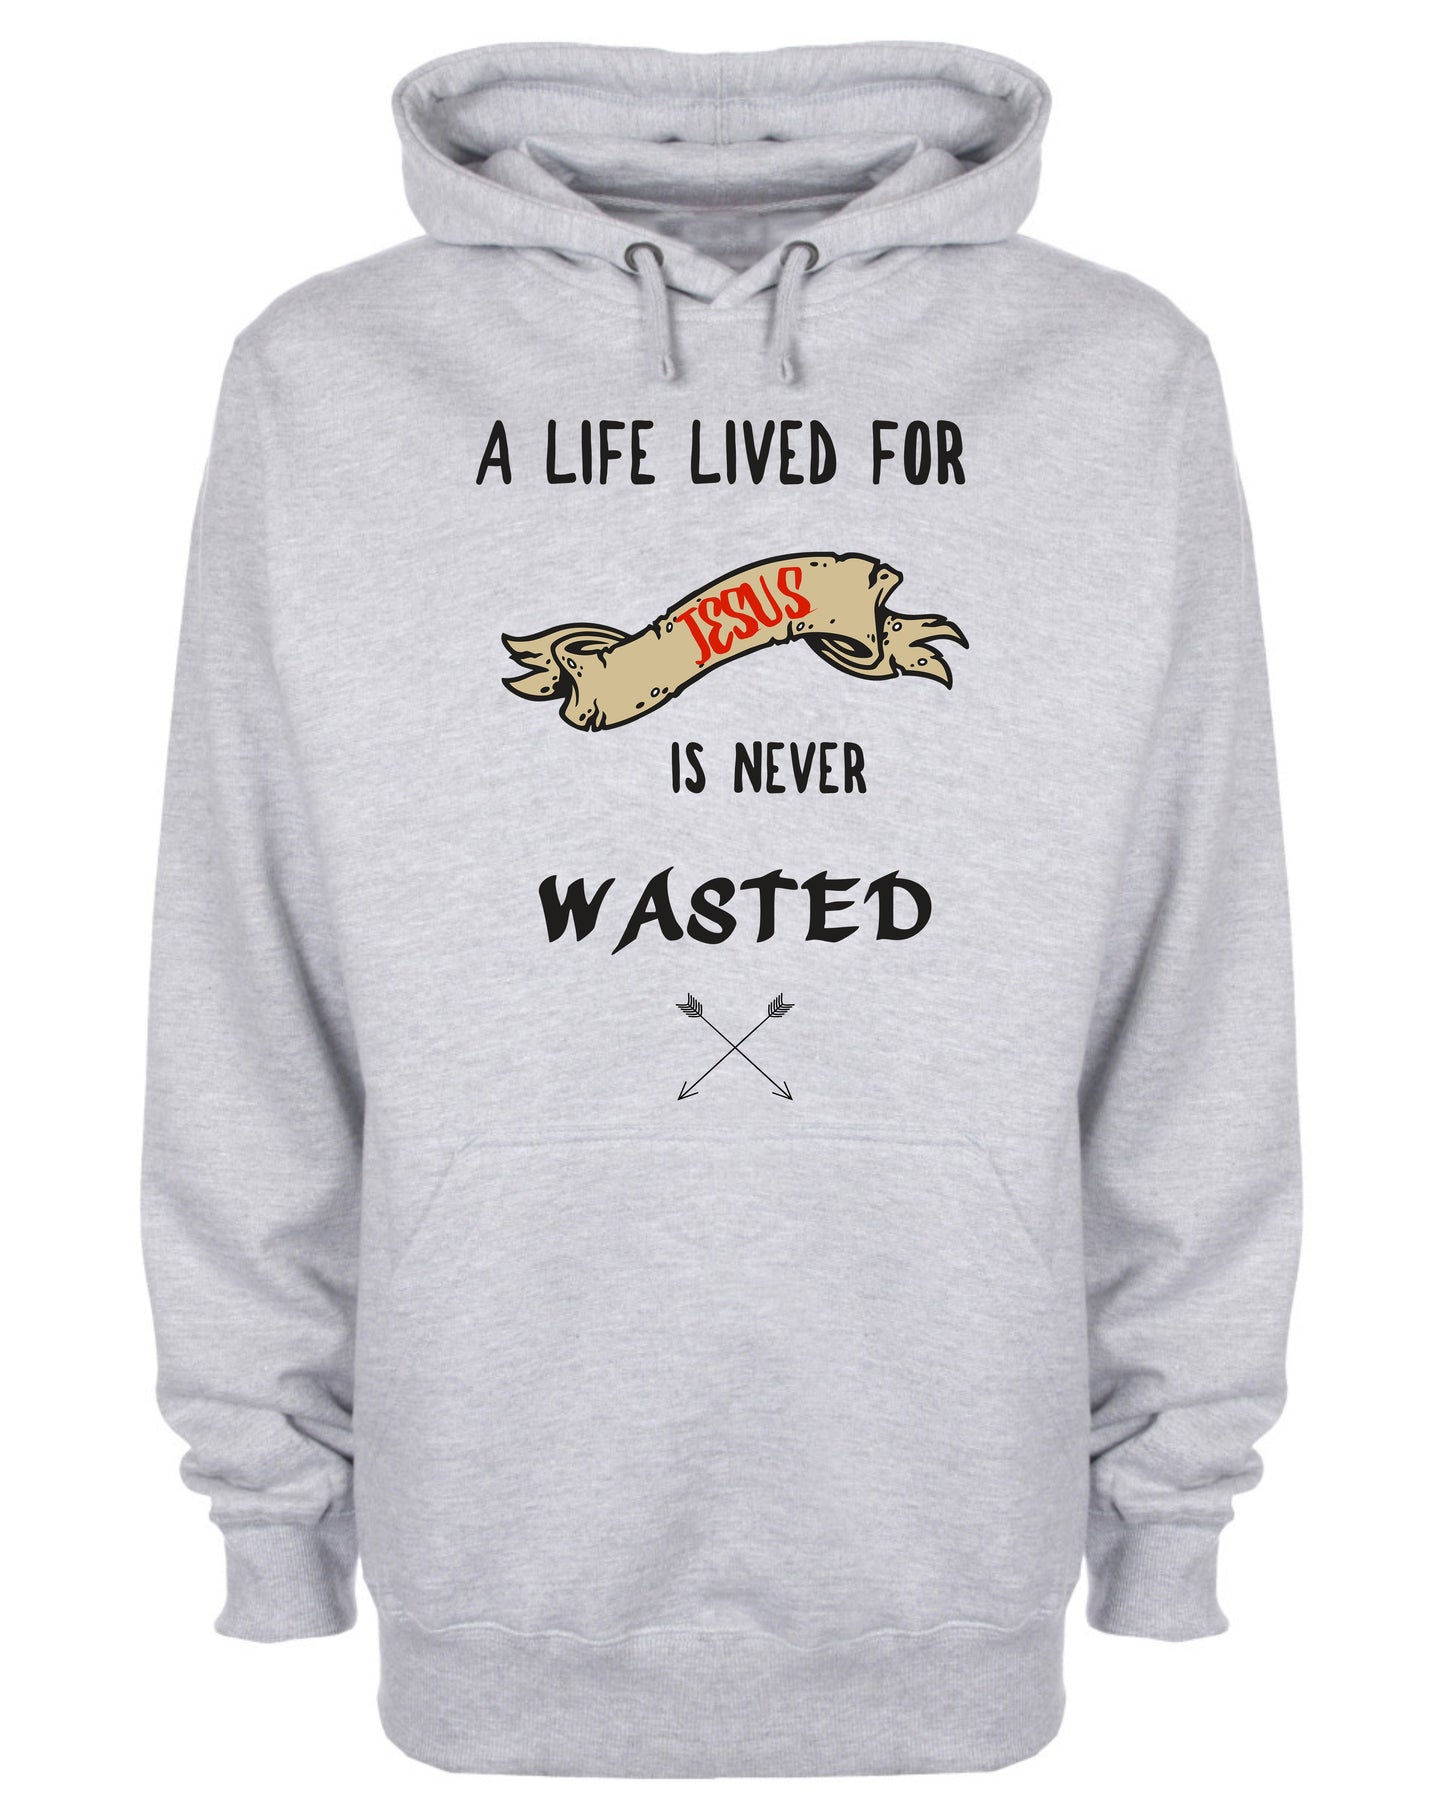 A Life Lived For Jesus Is Never Wasted Hoodie Christian Sweatshirt